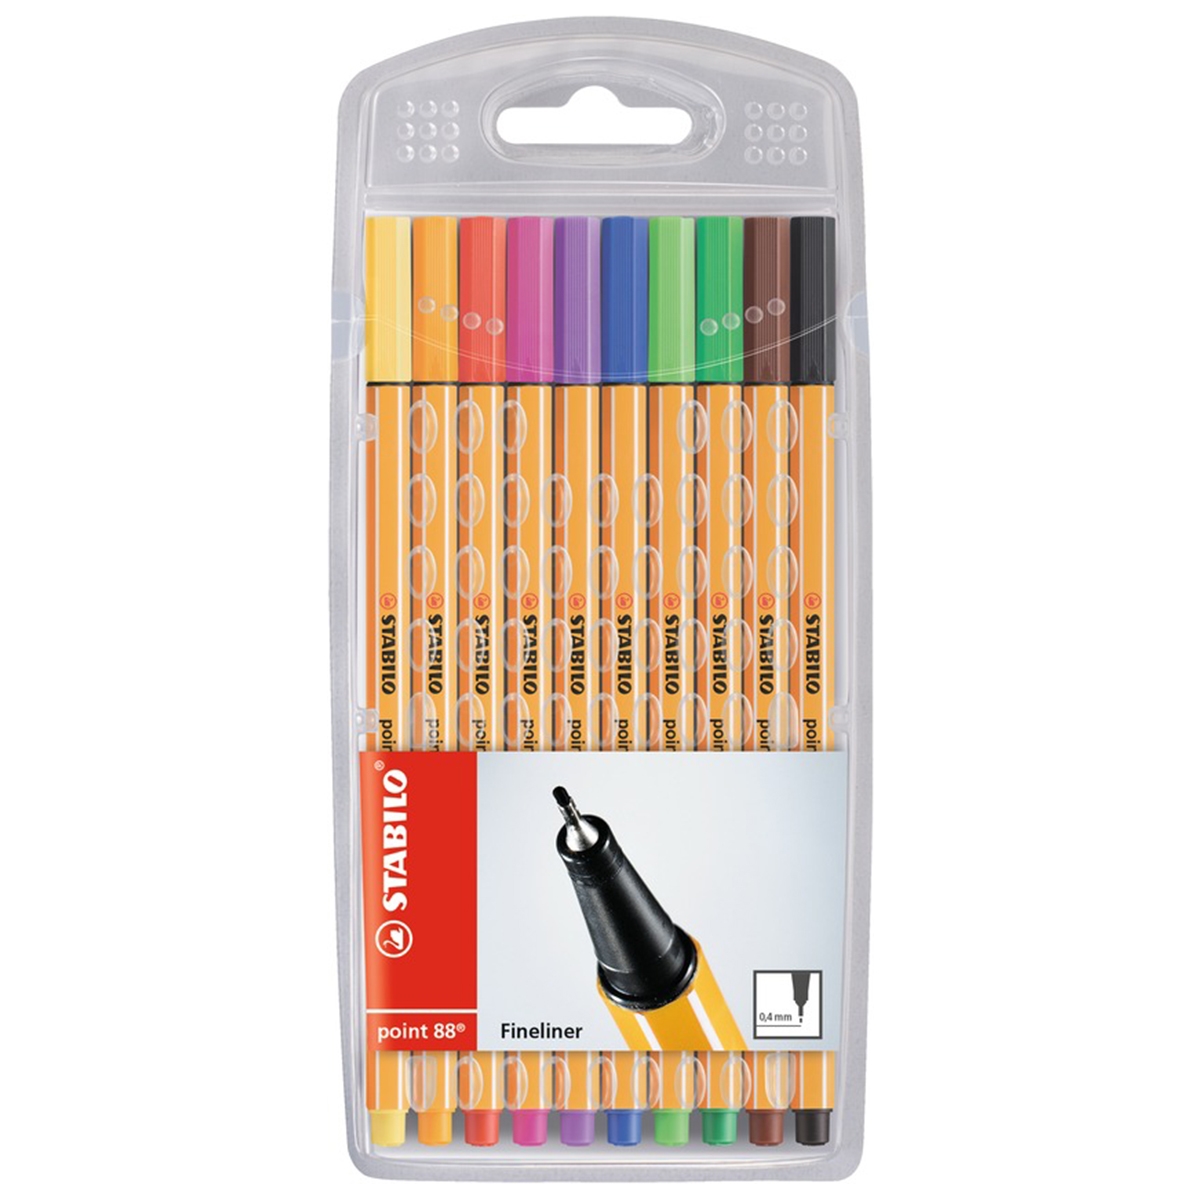 ROTULADORES STABILO POINT 88 (10 PZS.) | Office Depot Mexico